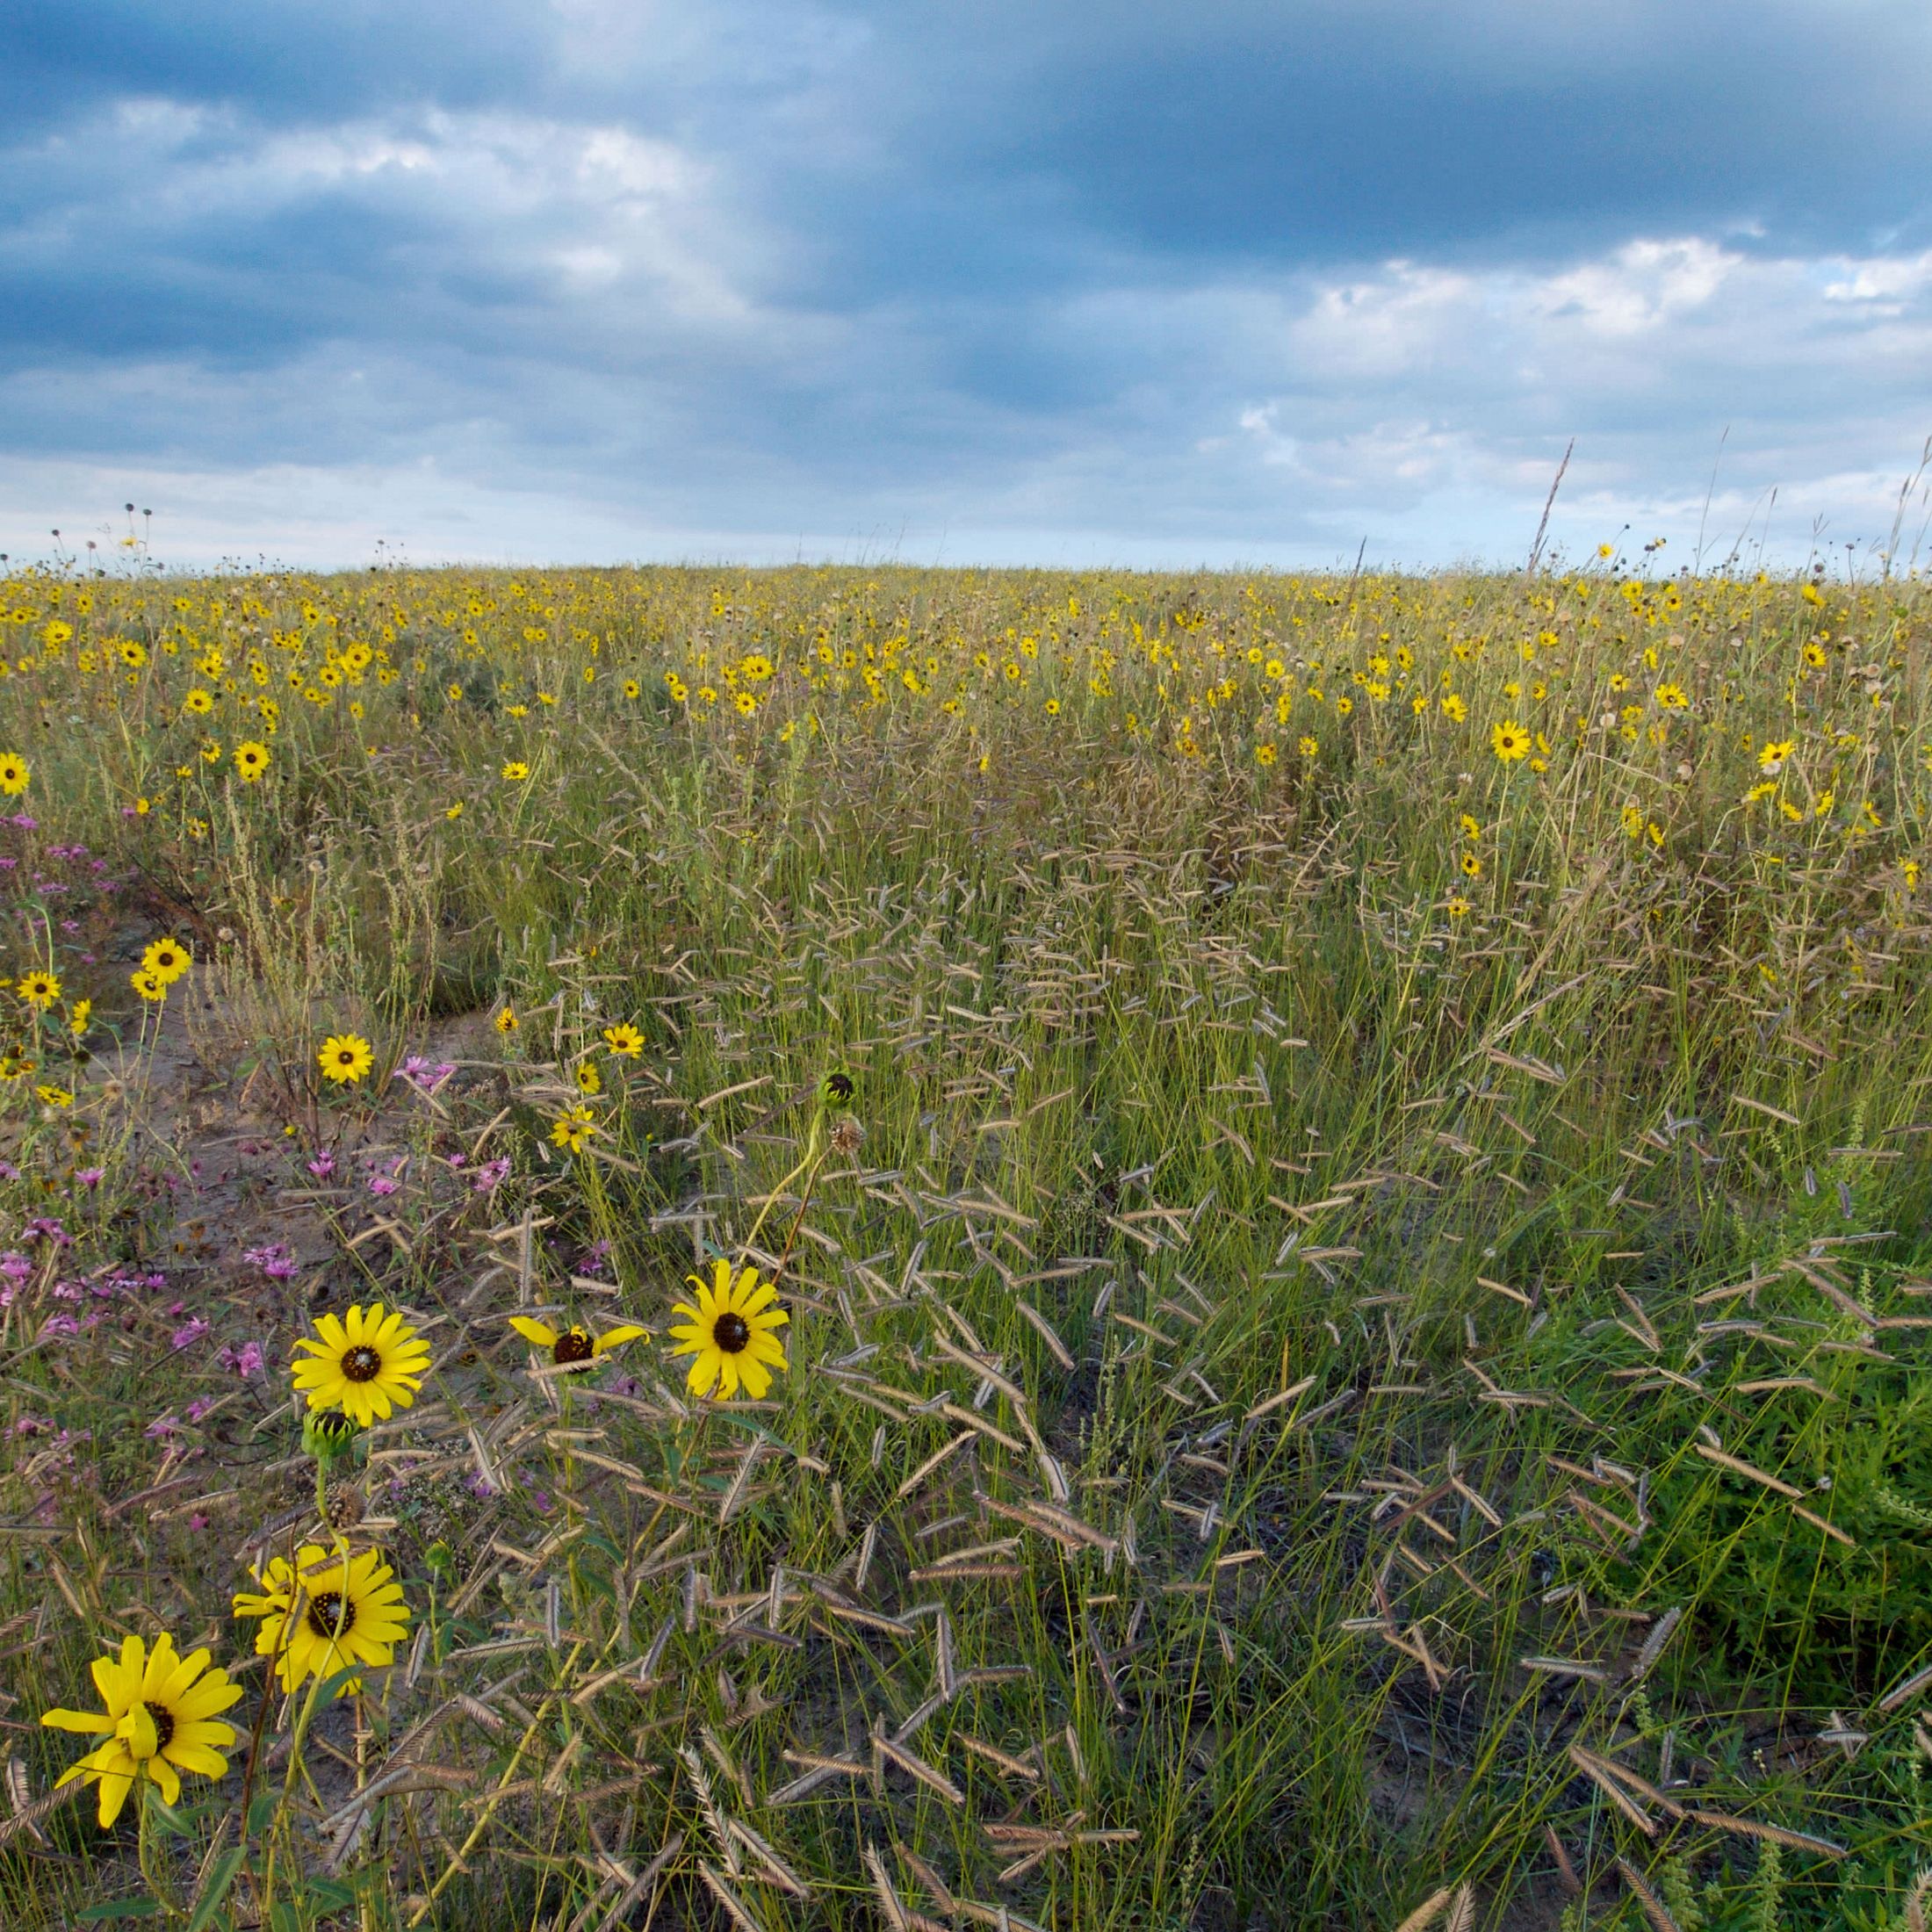 A wide field of yellow flowers extends to the horizon, with a broad blue sky filled with clouds overhead.